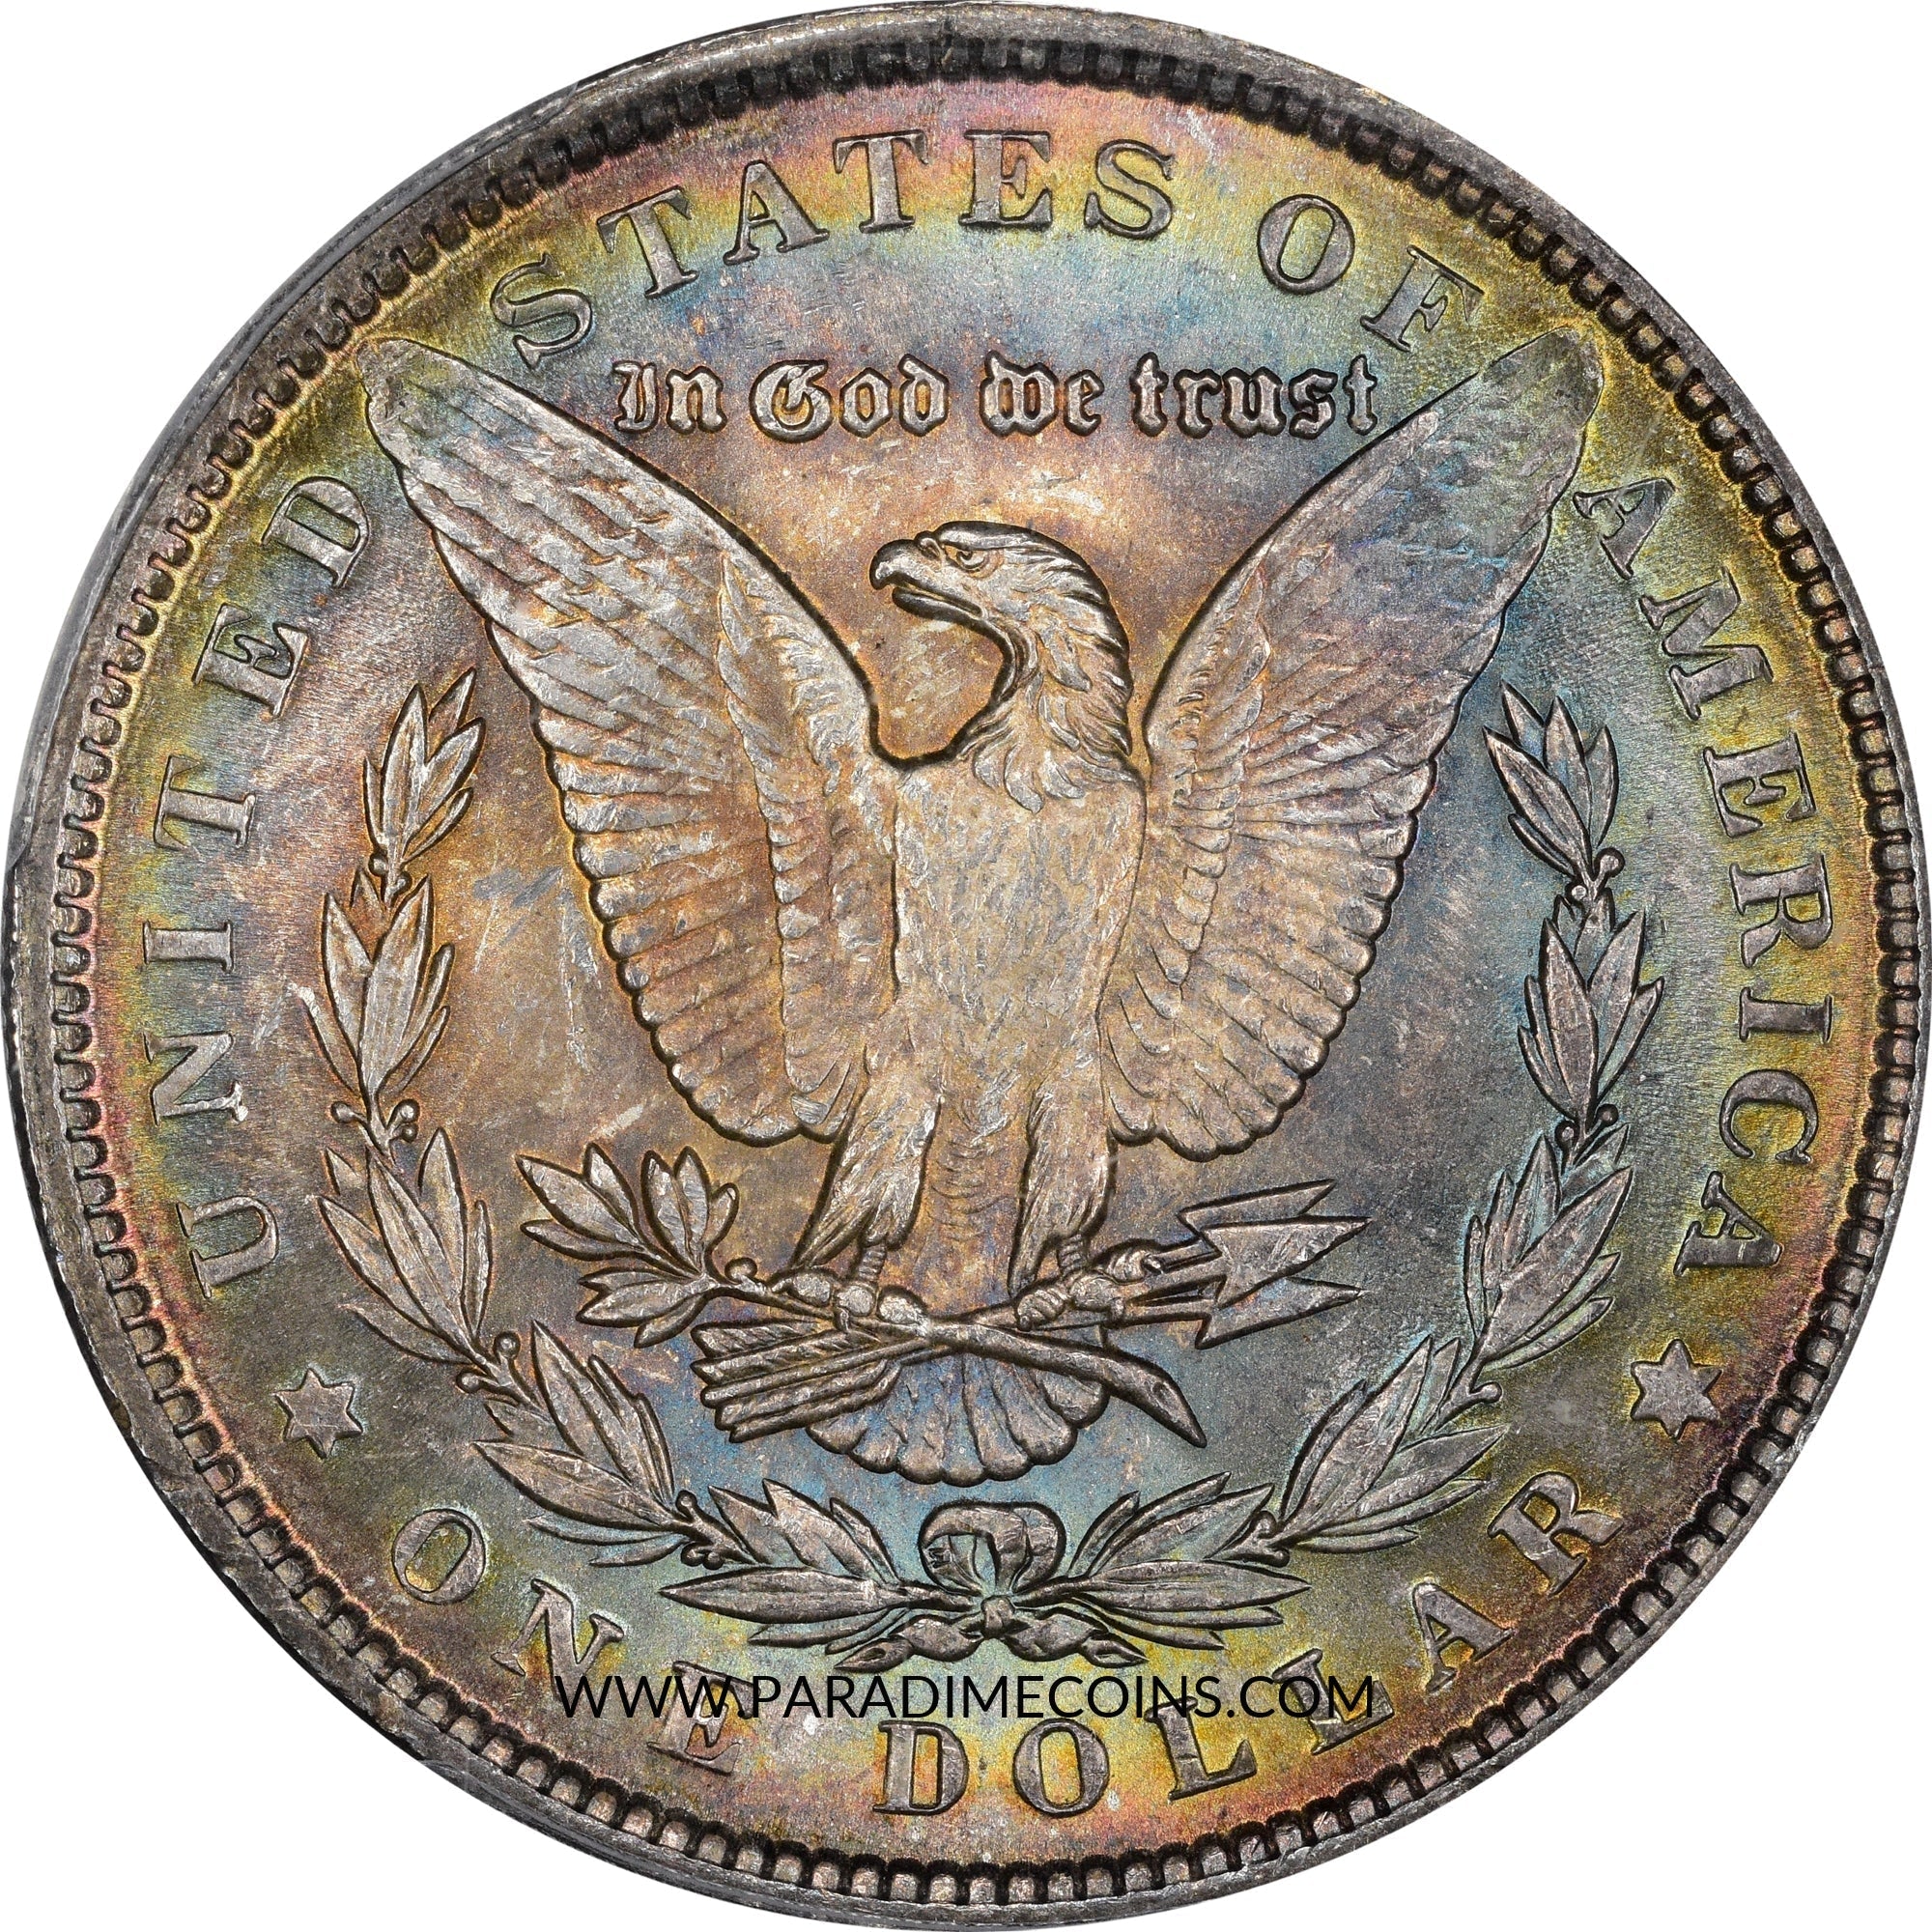 1889 $1 MS64 PCGS - Paradime Coins | PCGS NGC CACG CAC Rare US Numismatic Coins For Sale